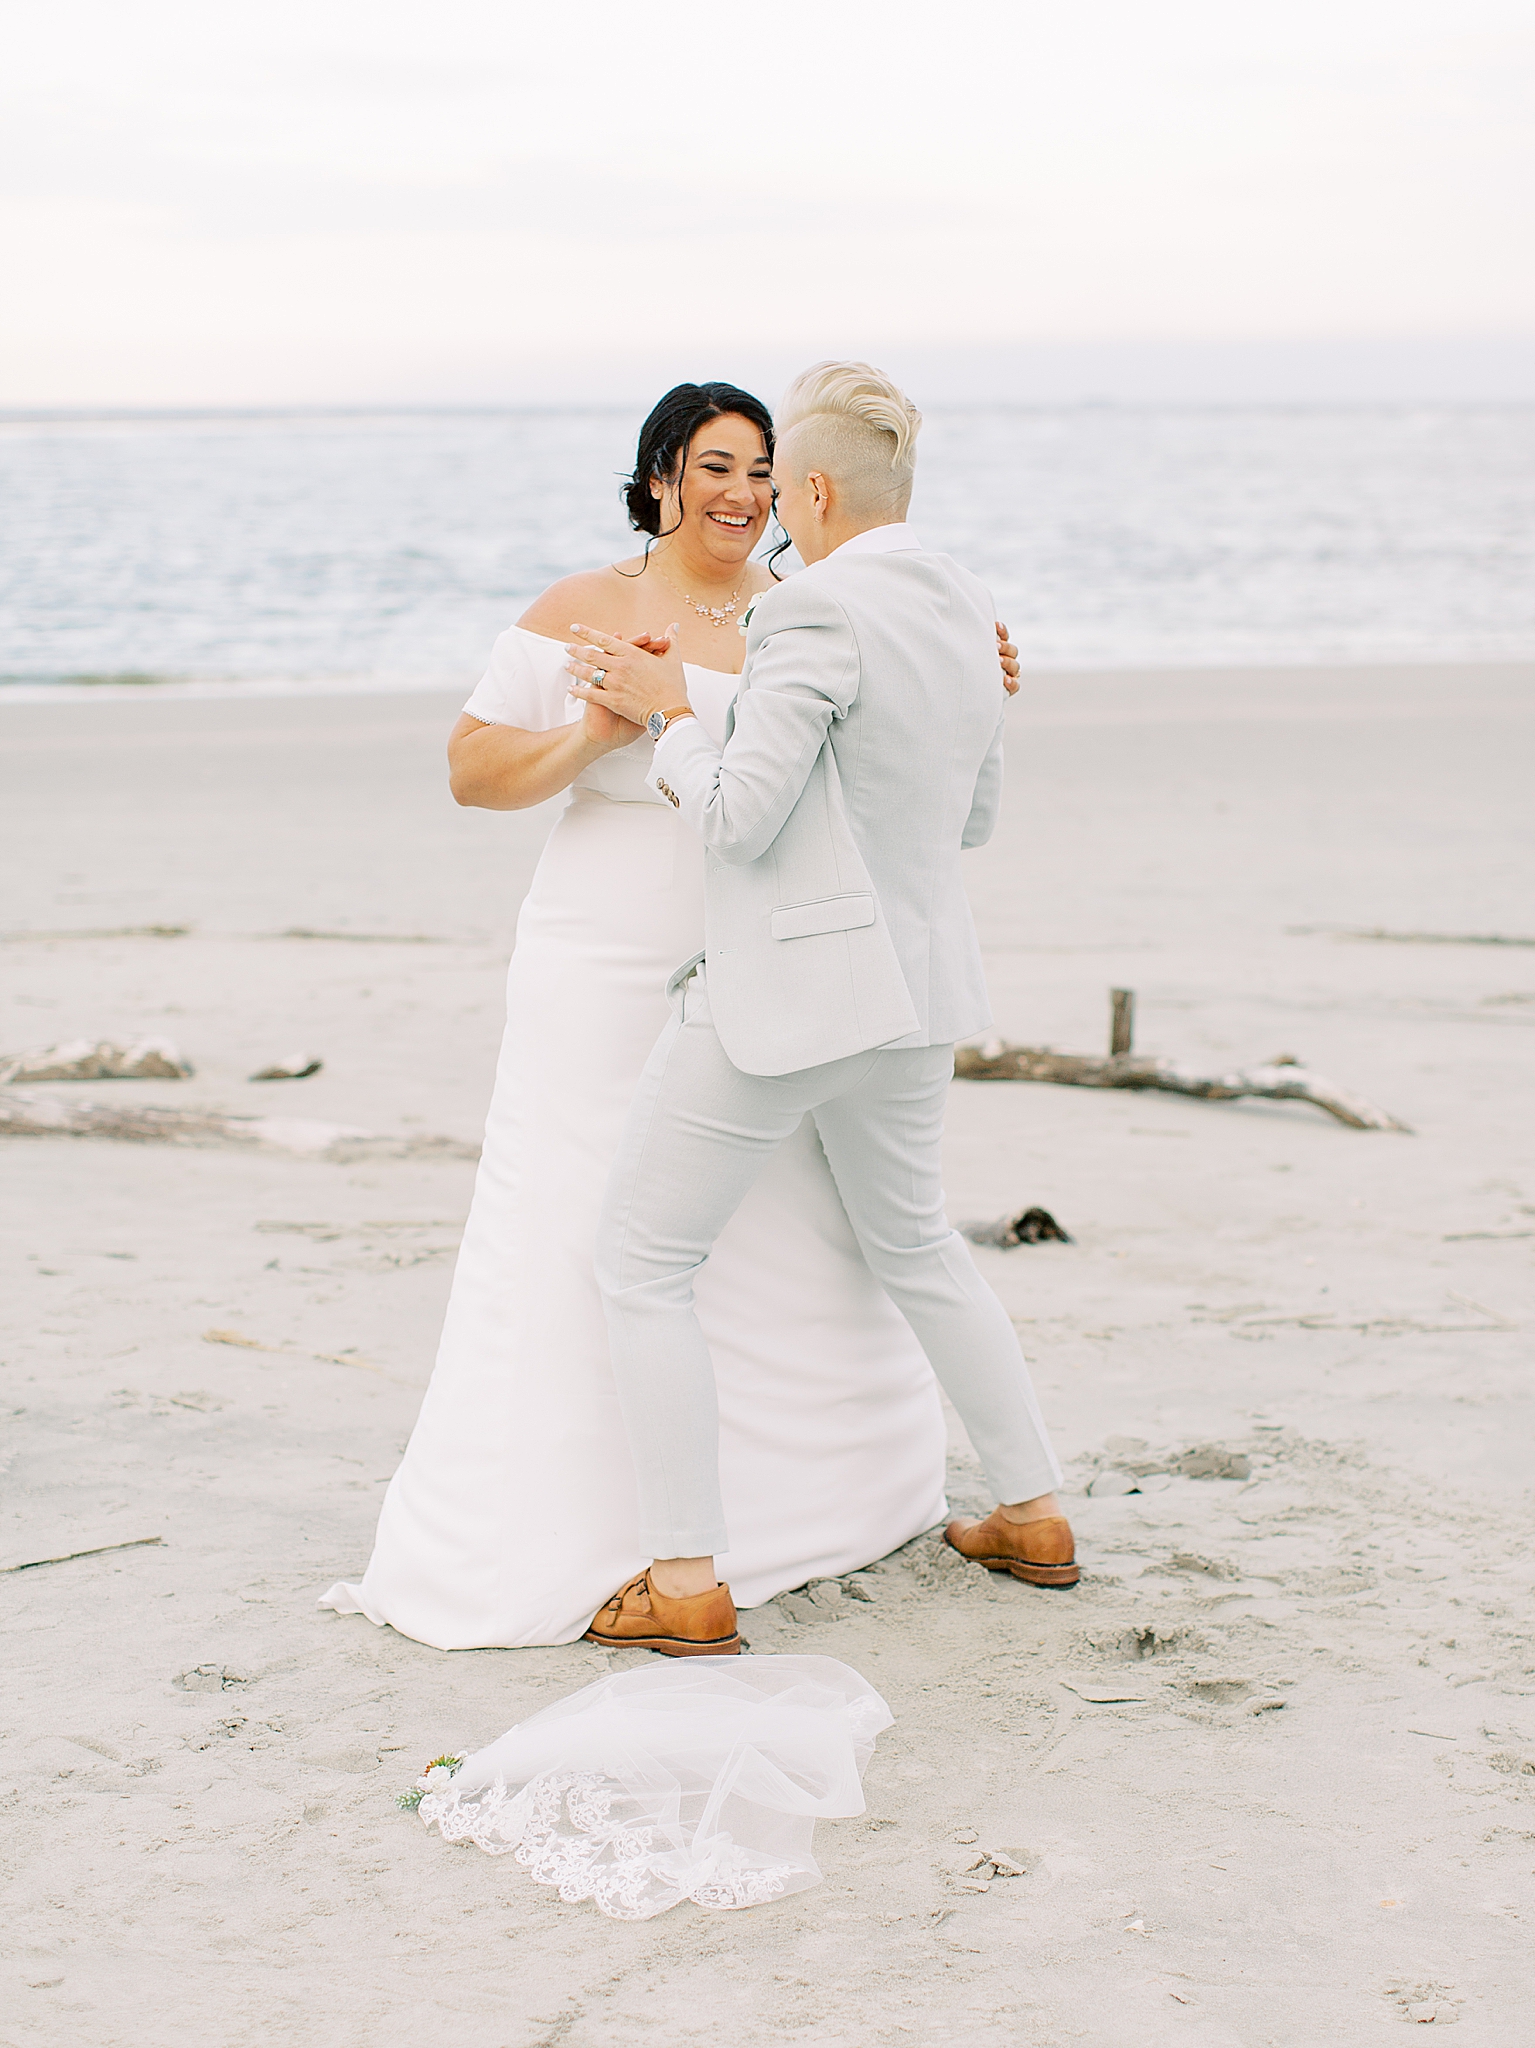 couple dances on beach after wedding ceremony